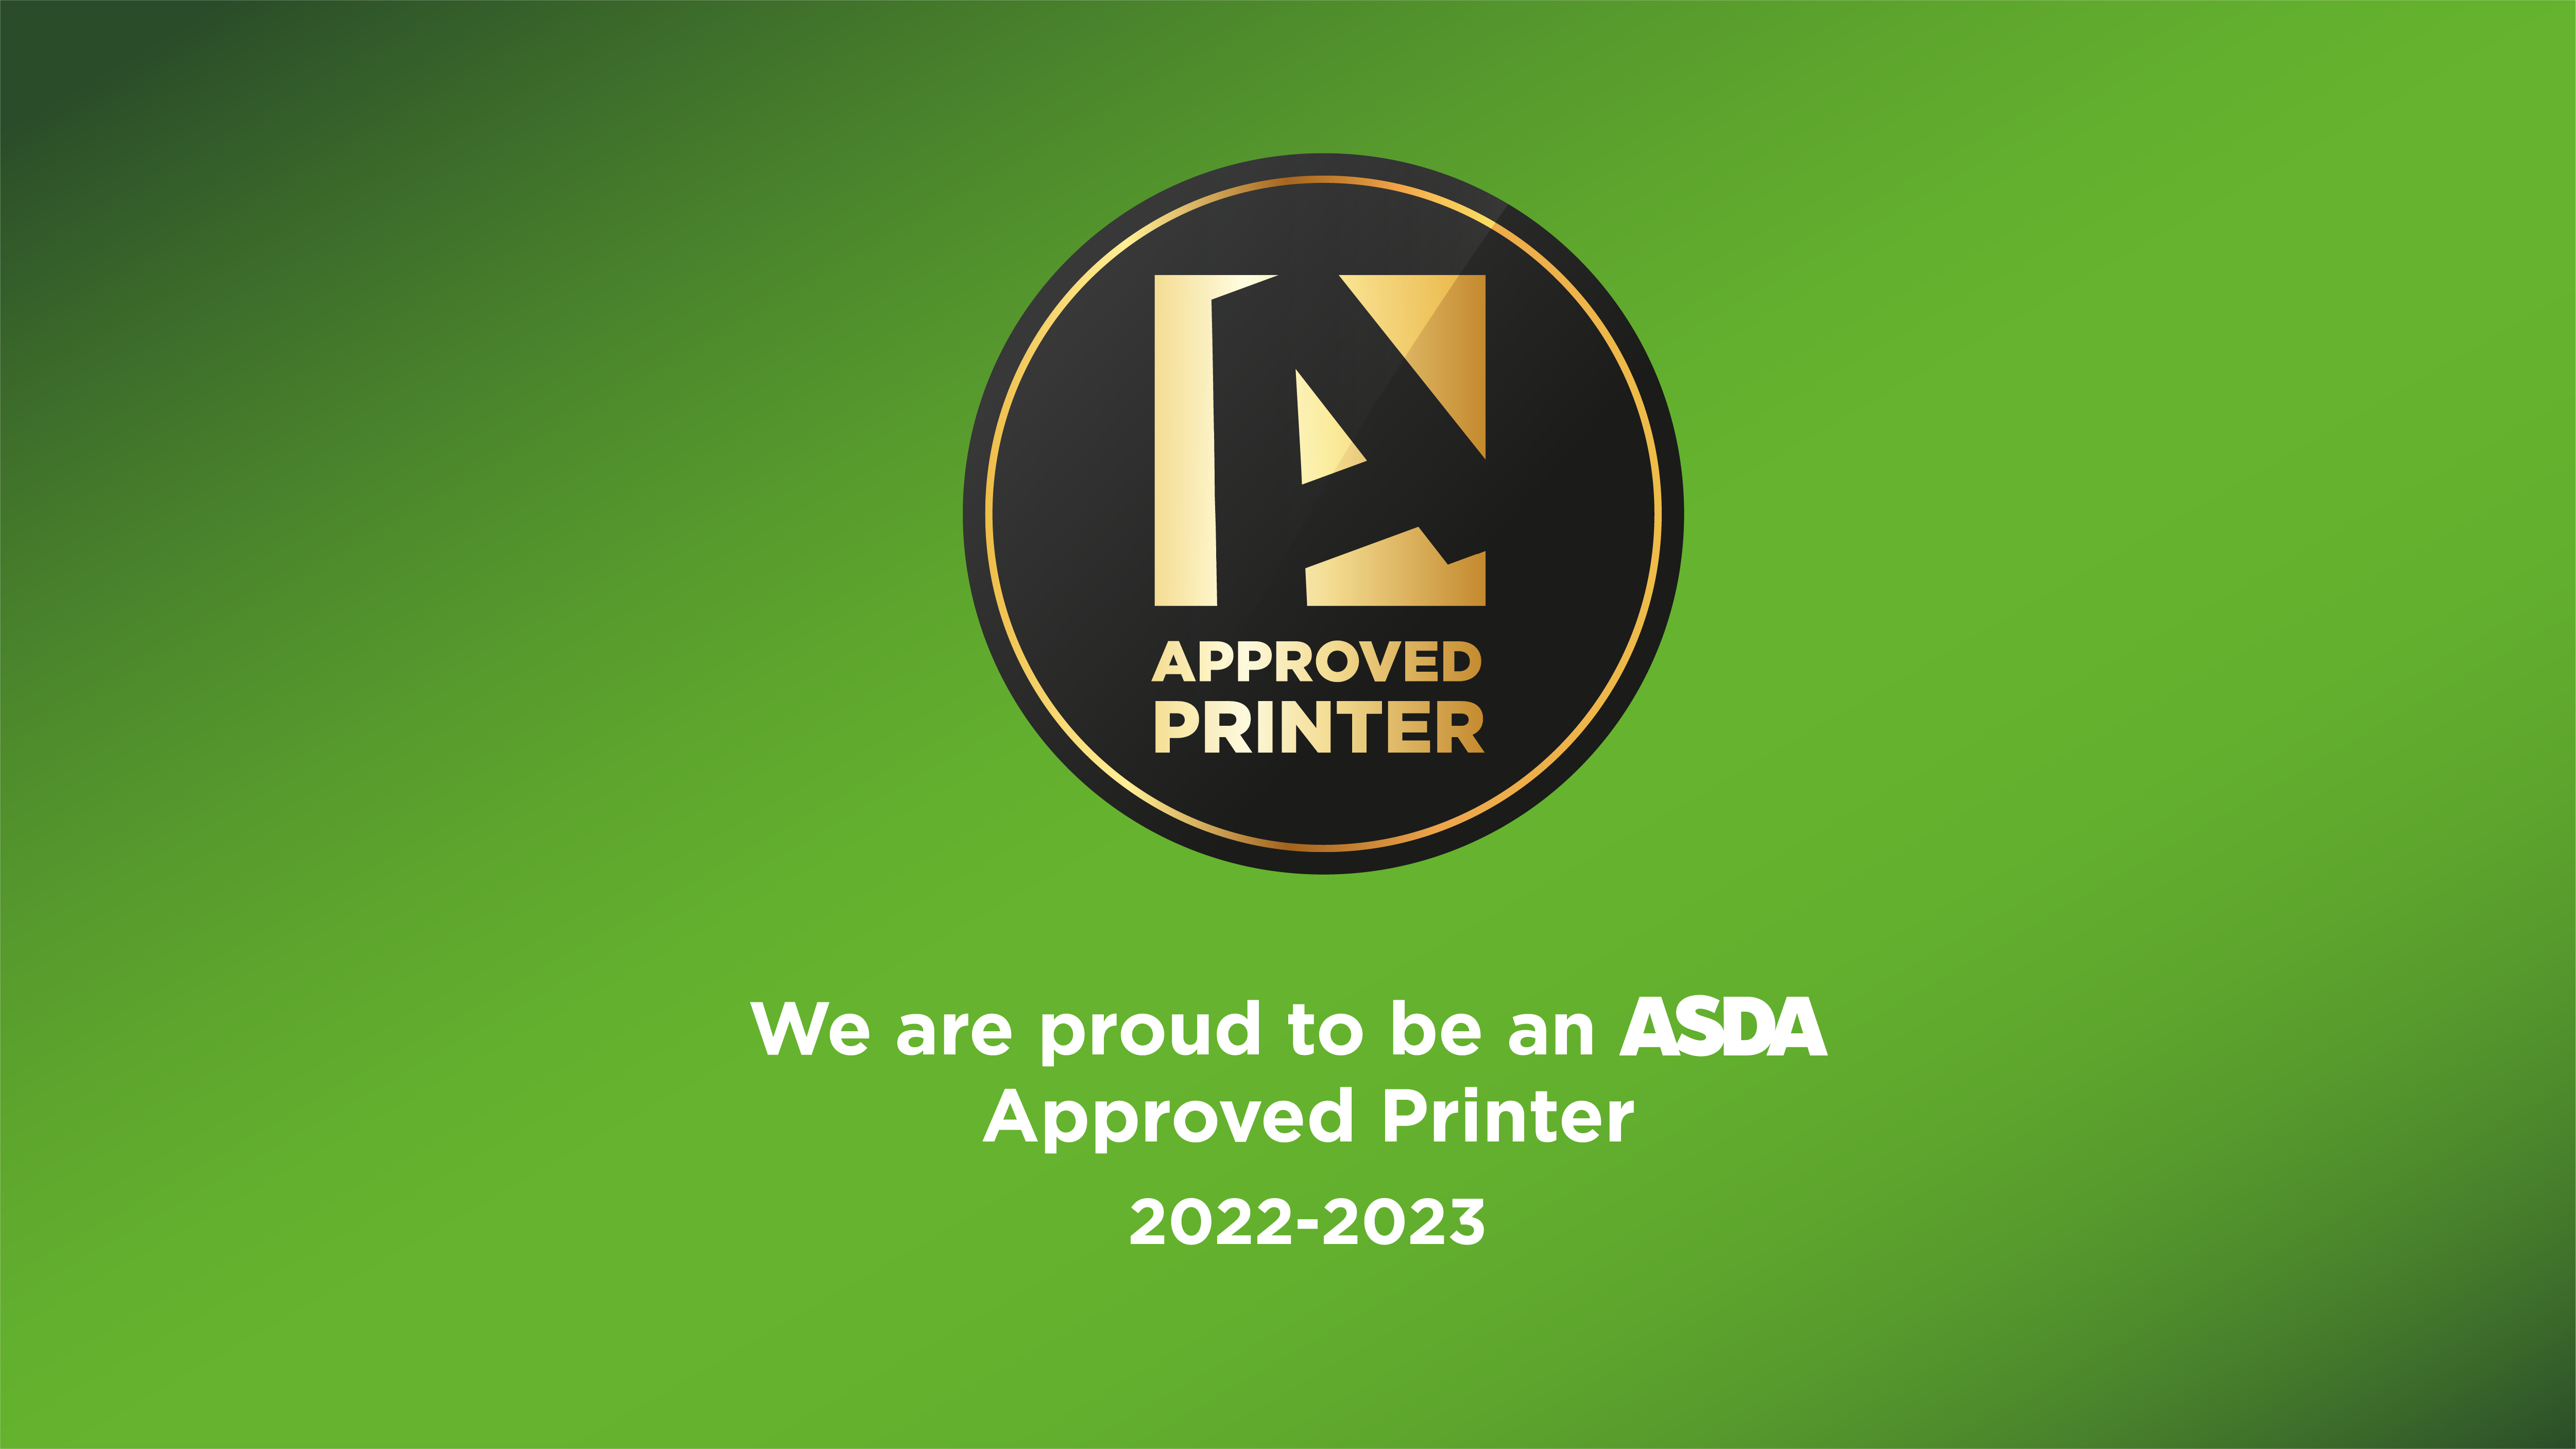 Cullen certified as an ASDA approved printer for yet another year Featured Image